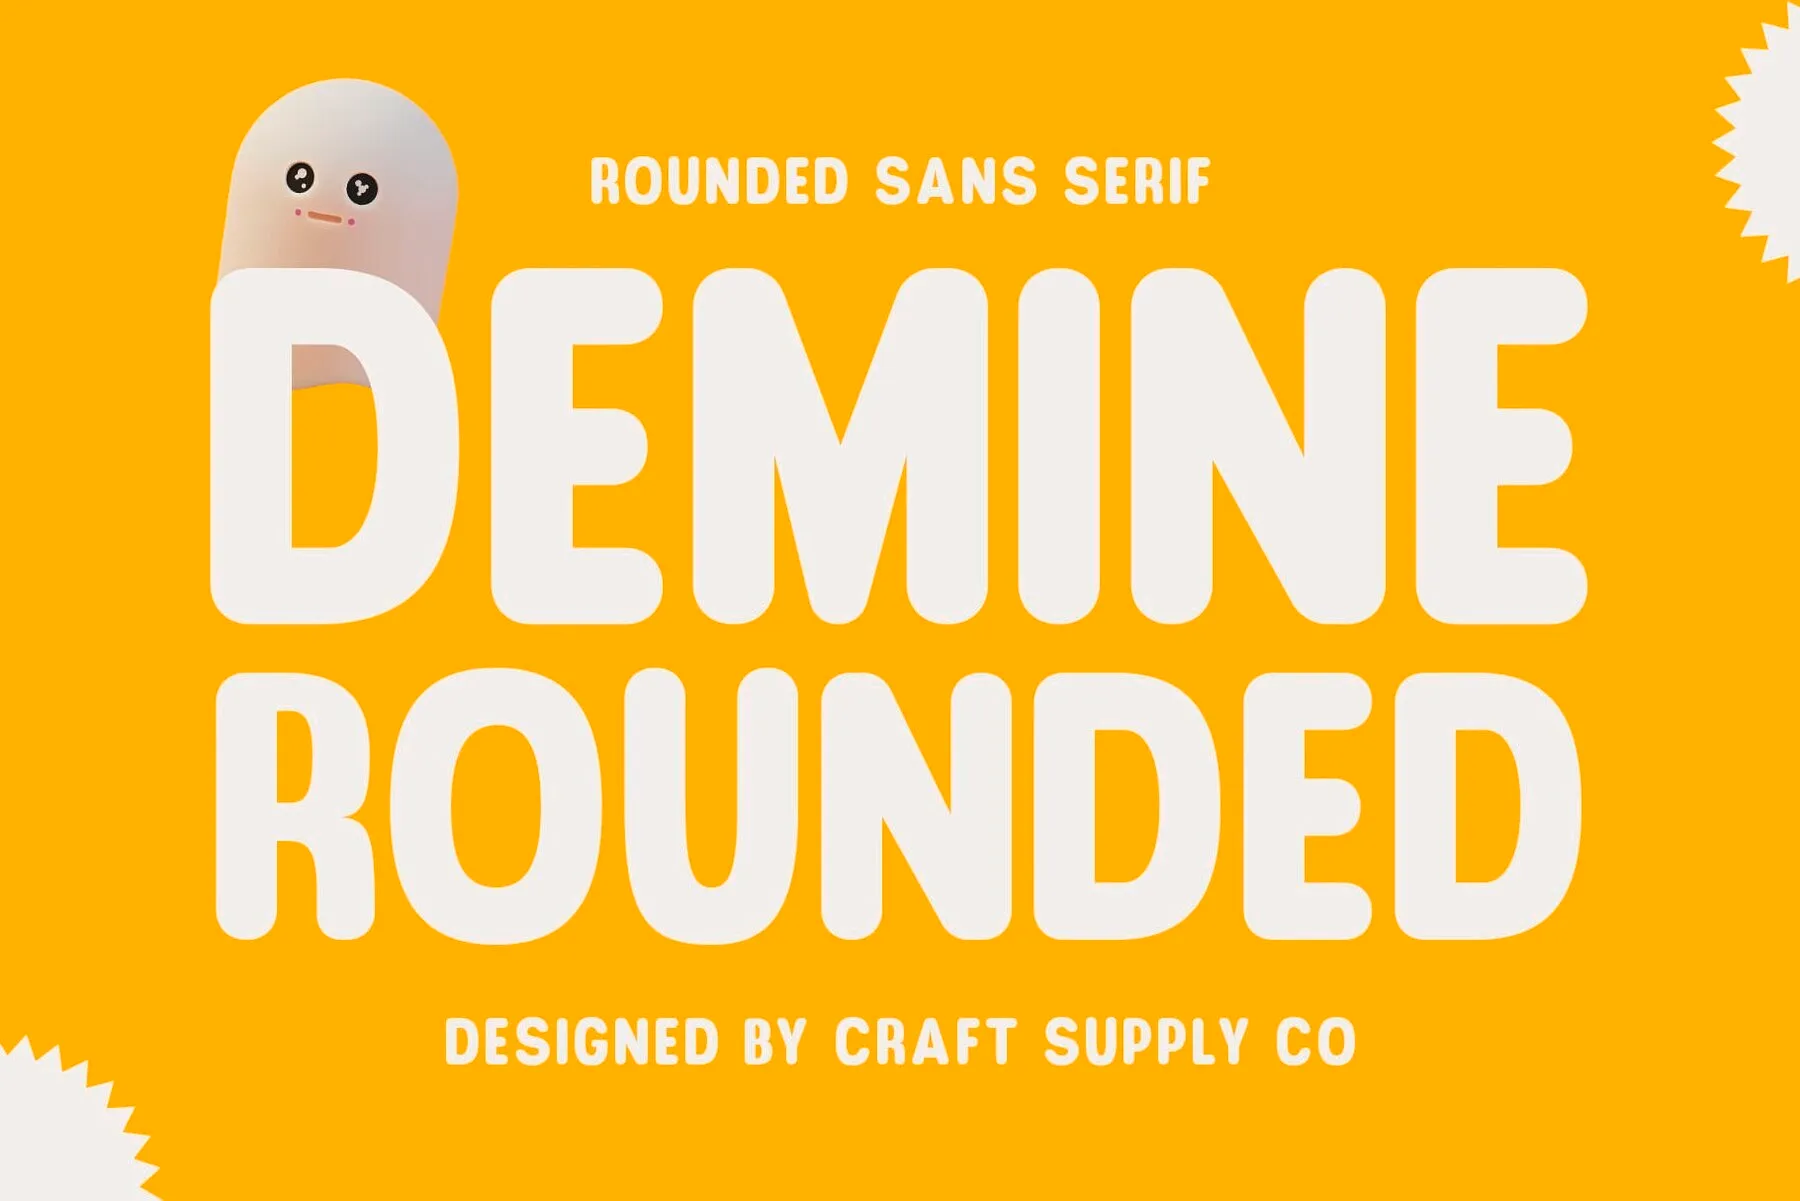 Demine Rounded